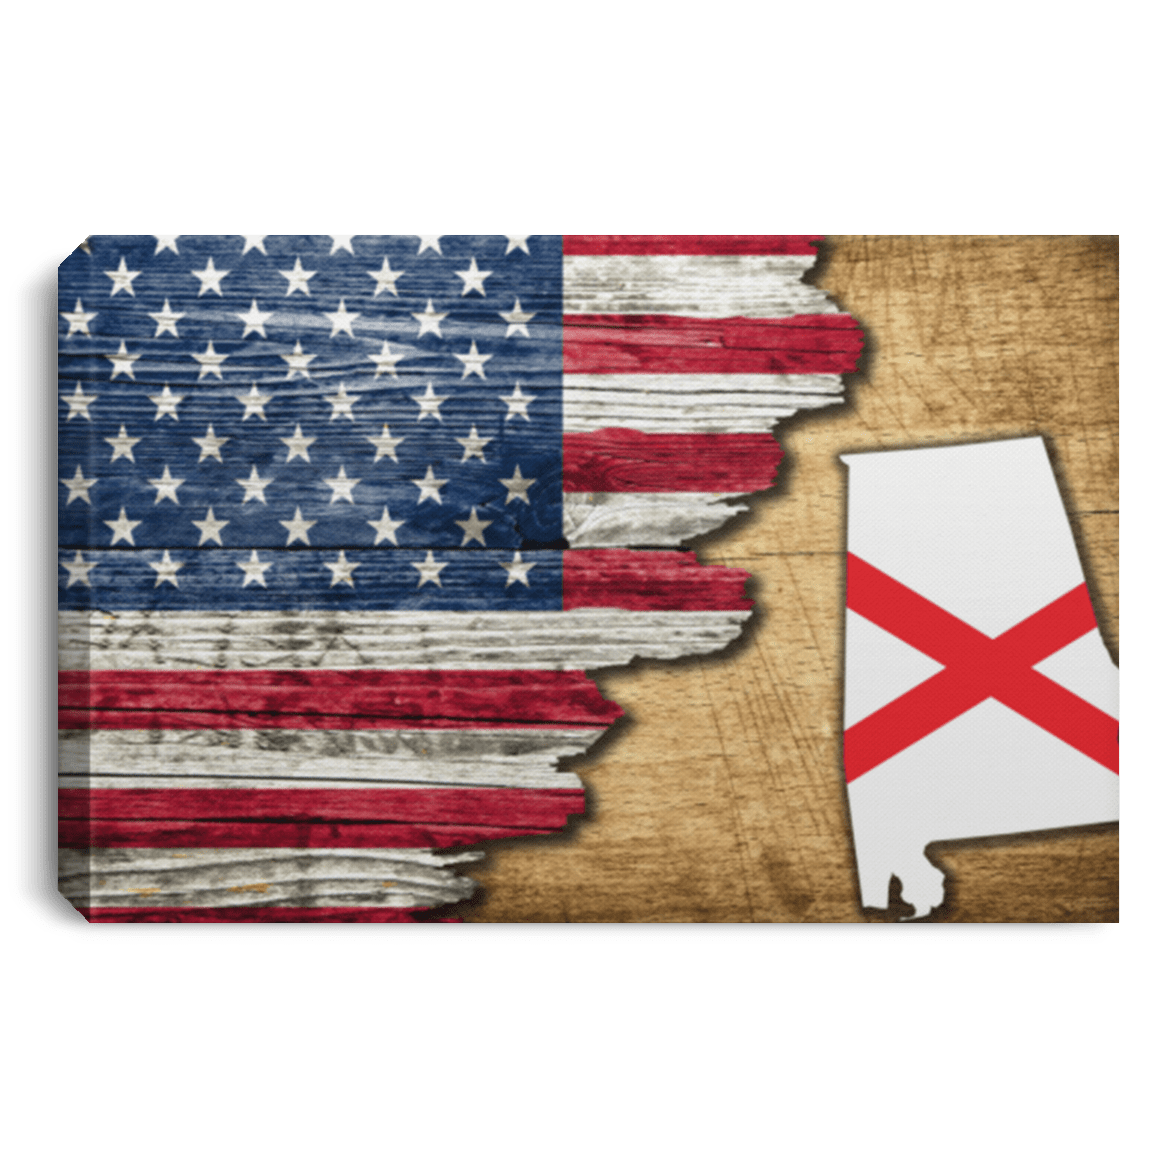 United States/Alabama Flag Ripped Effect 24X16 Inches  Landscape Canvas .75In Frame